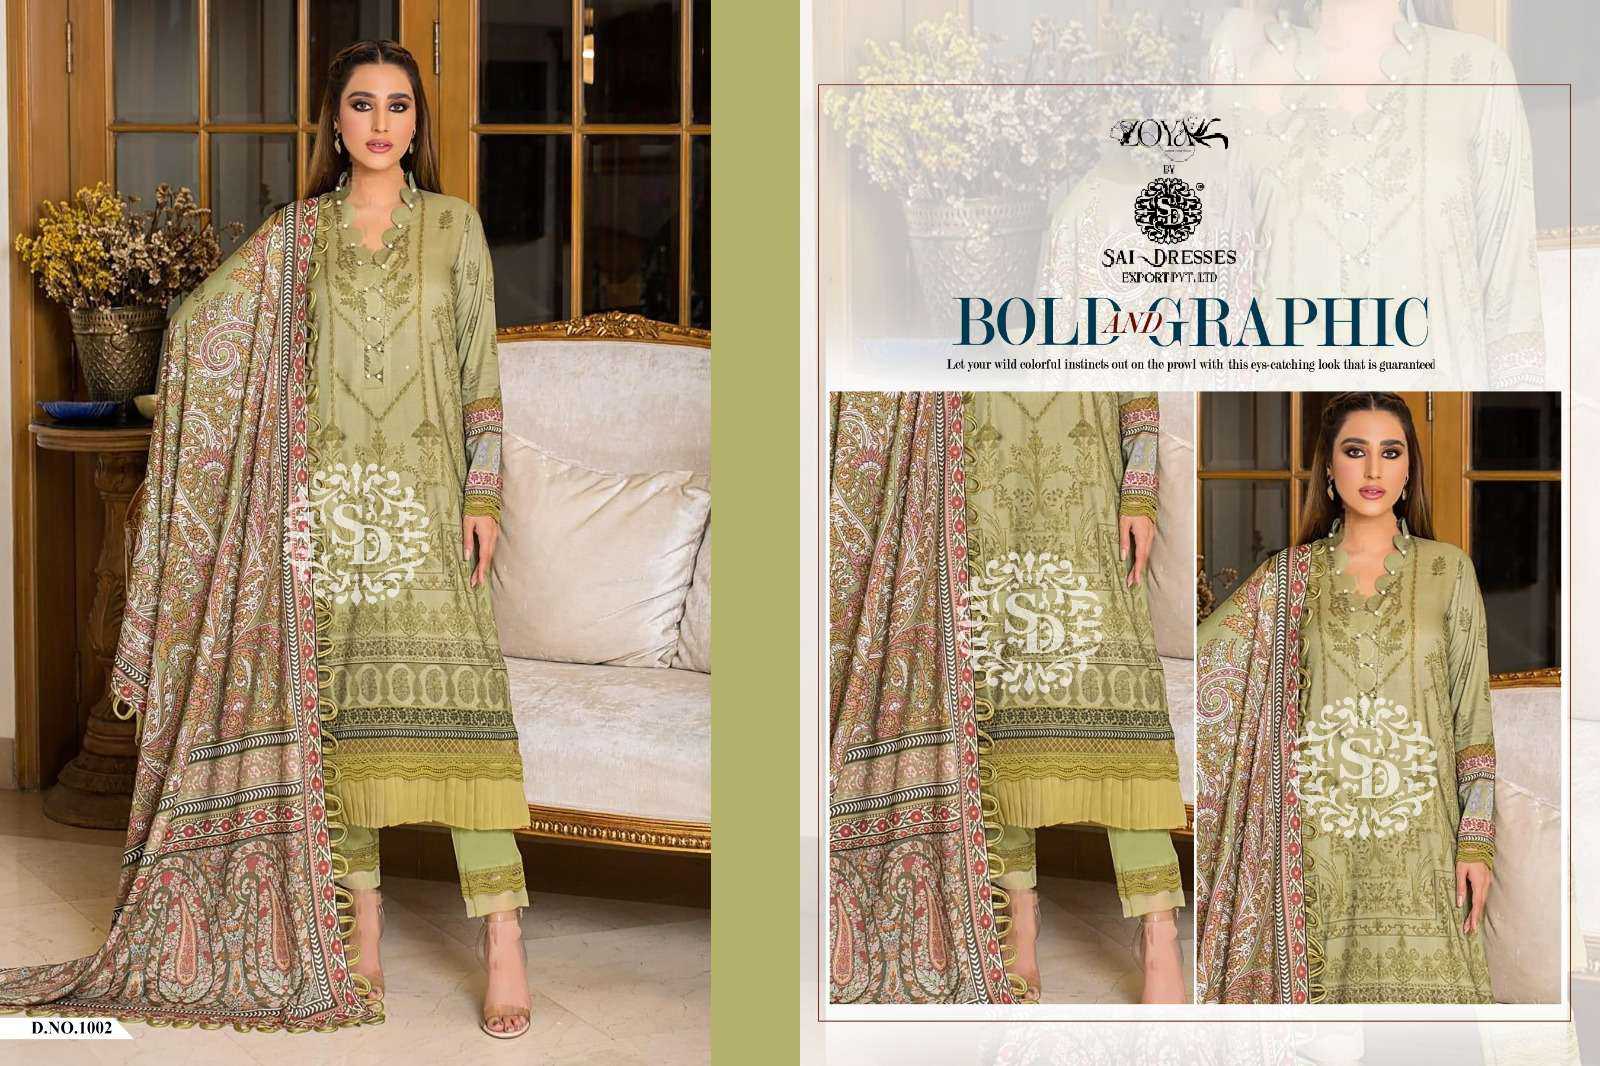 FIRDOUS LAWN PURE COTTON WITH PATCH EMBROIDERED PAKISTANI DRESS MATERIAL IN WHOLESALE RATE IN SURAT